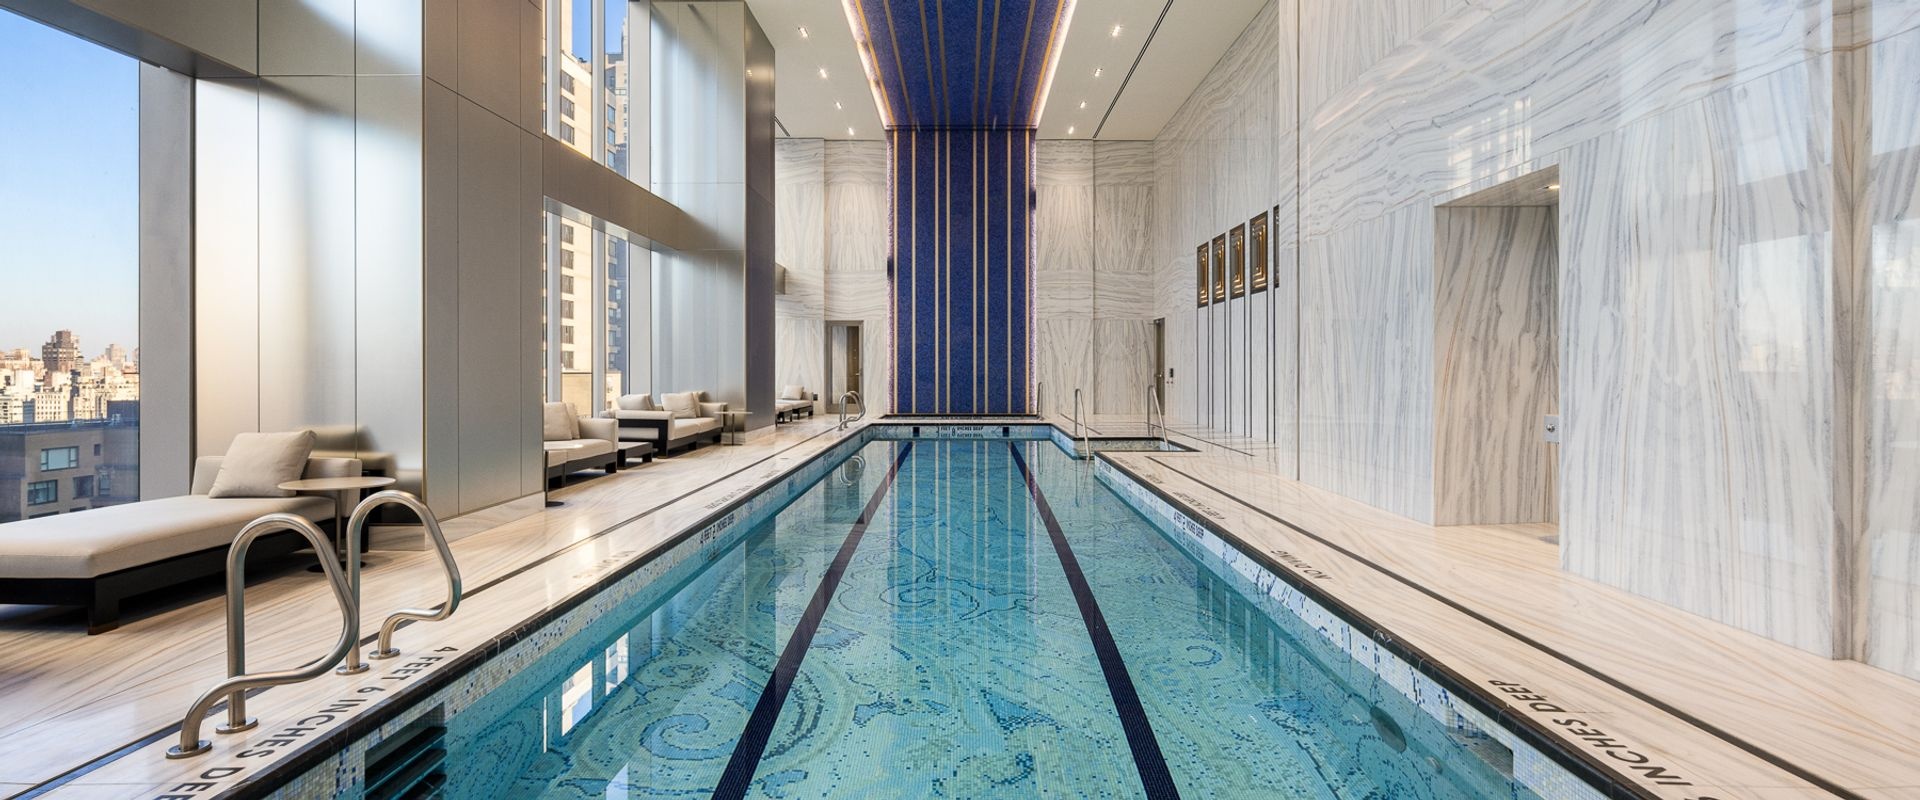 CENTRAL PARK TOWER - POOL